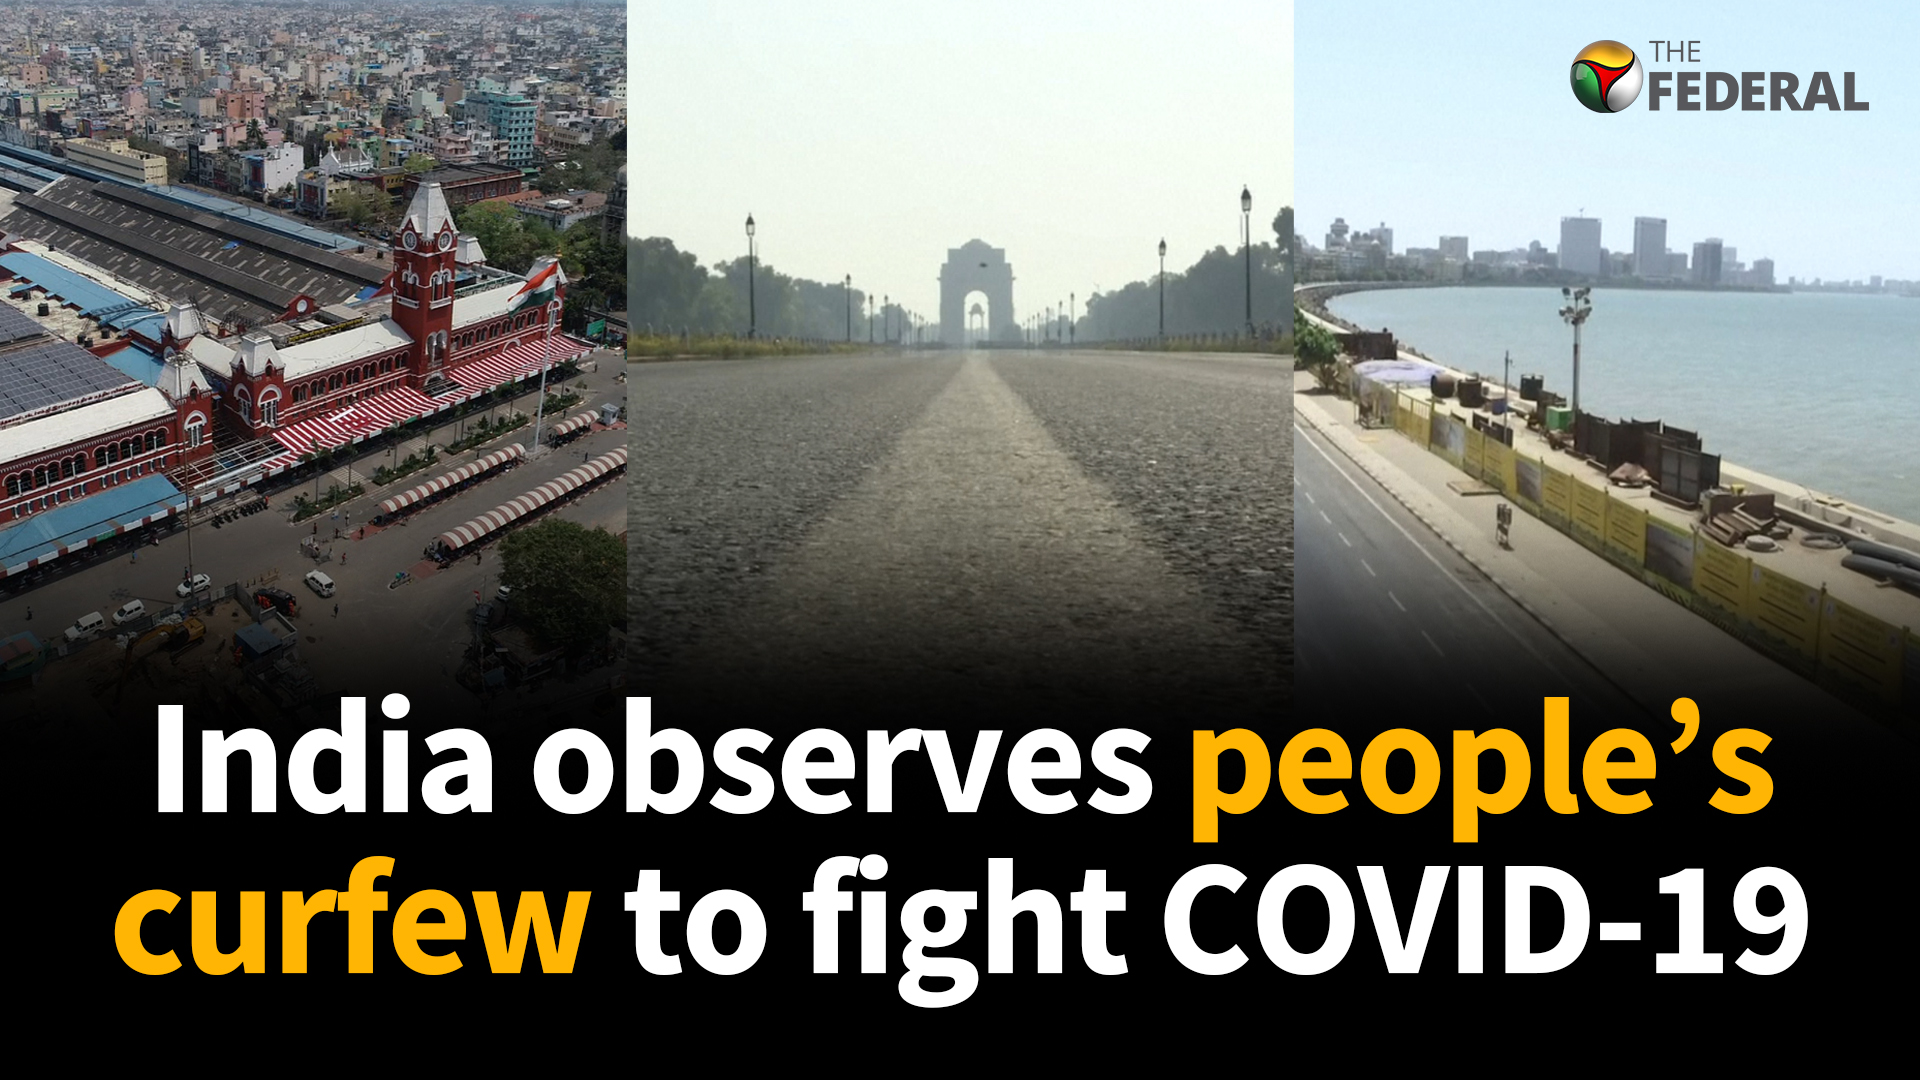 India observes people’s curfew to fight COVID-19